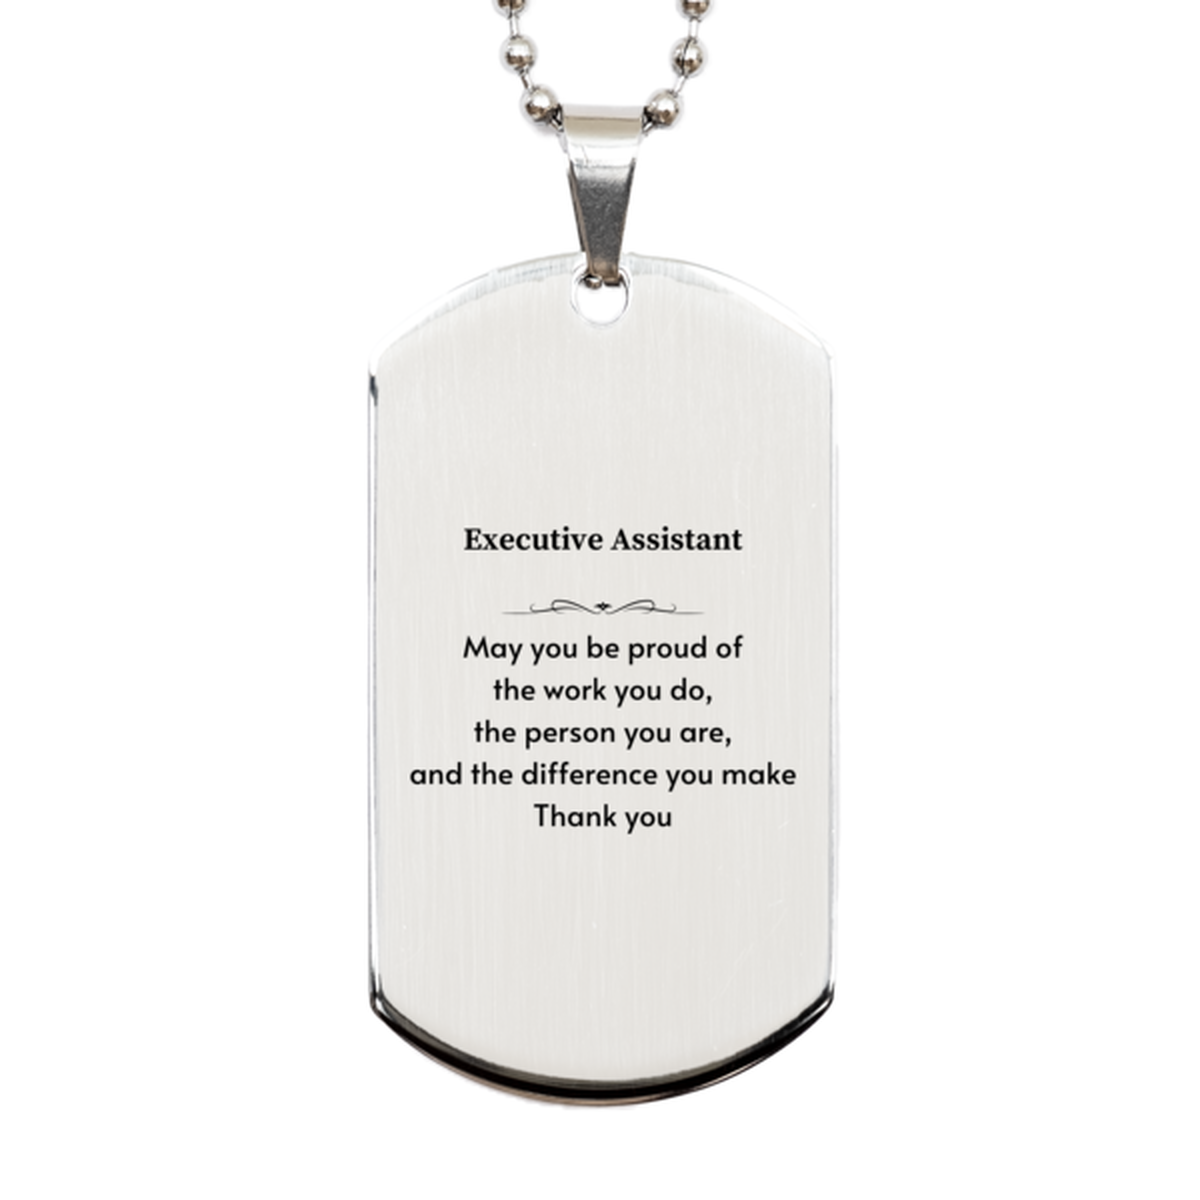 Heartwarming Silver Dog Tag Retirement Coworkers Gifts for Executive Assistant, Executive Assistant May You be proud of the work you do, the person you are Gifts for Boss Men Women Friends